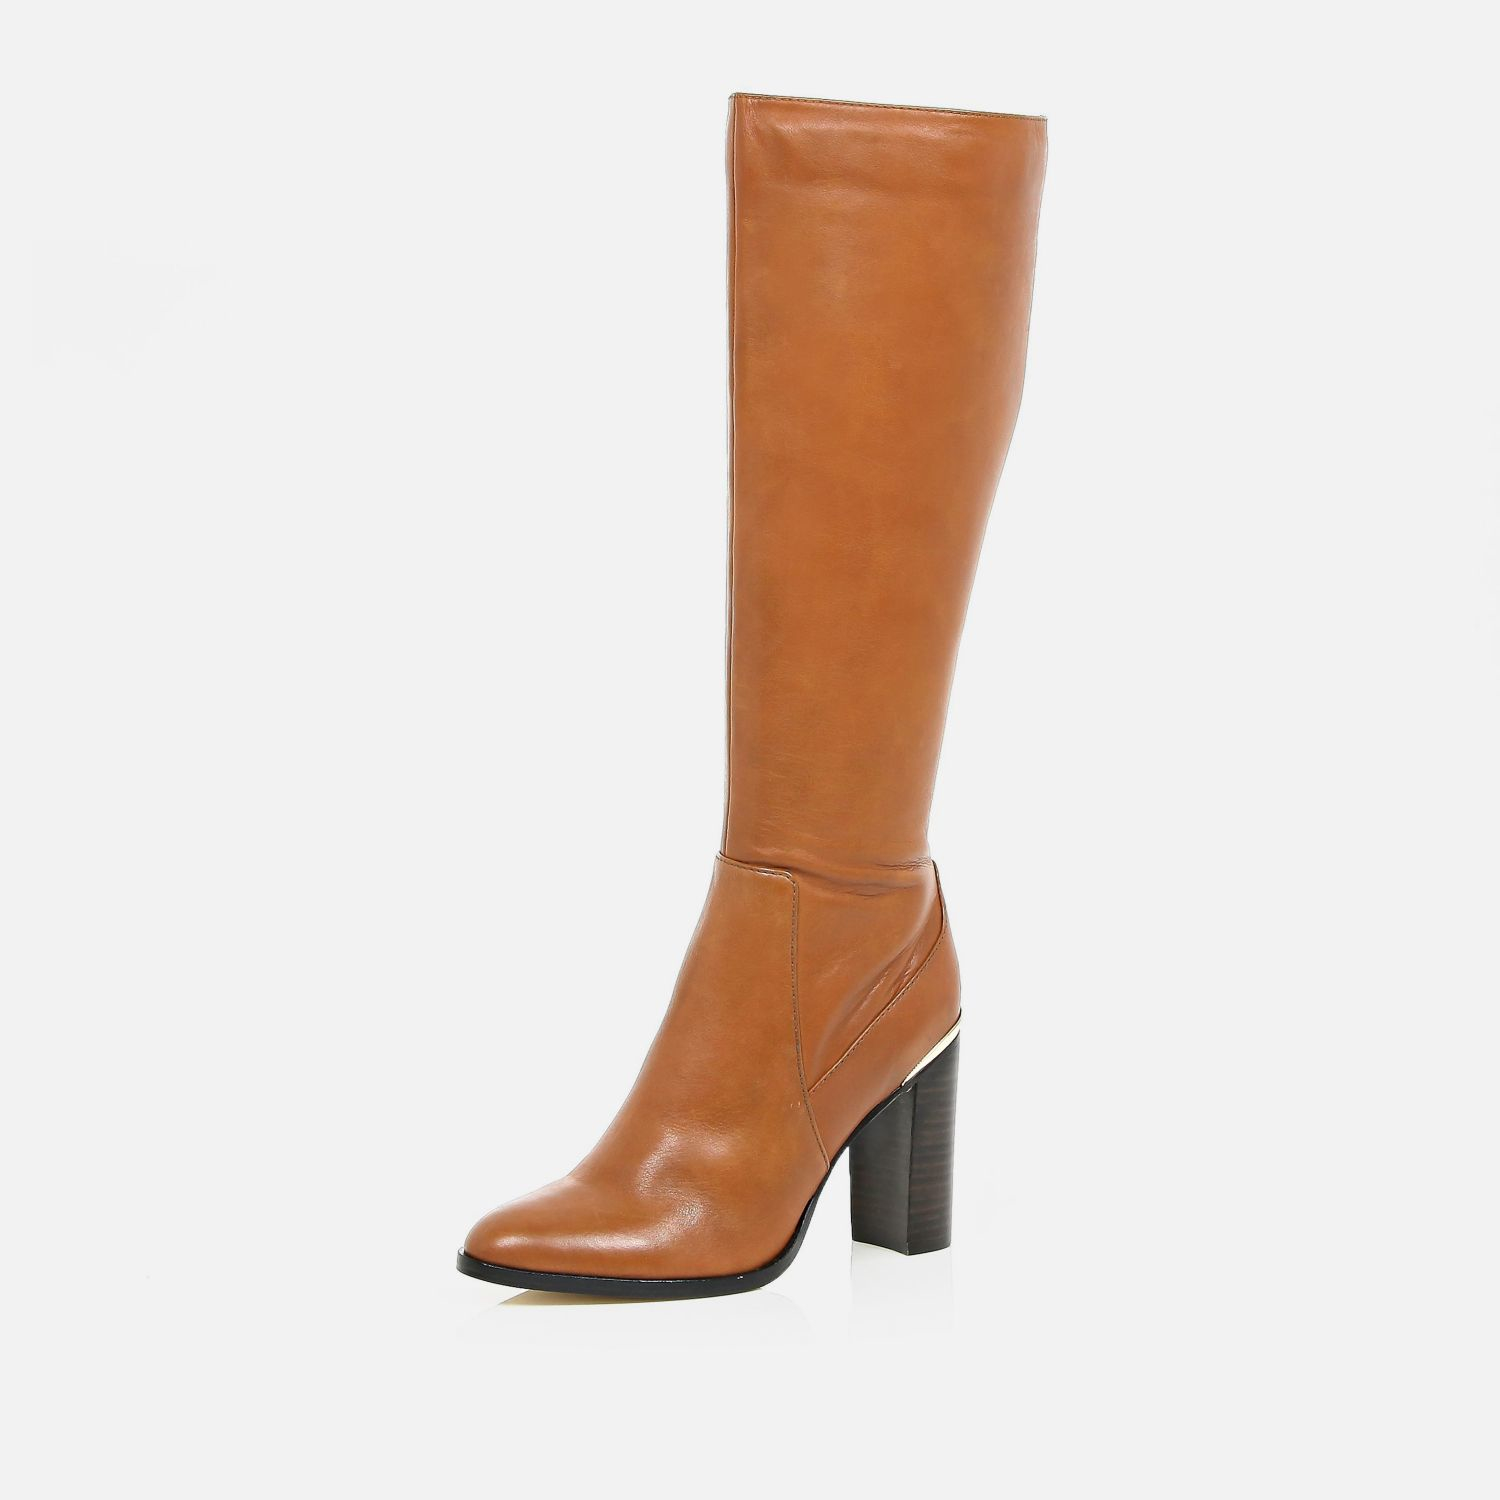 Lyst - River island Light Brown Leather Knee High Heeled Boots in Brown